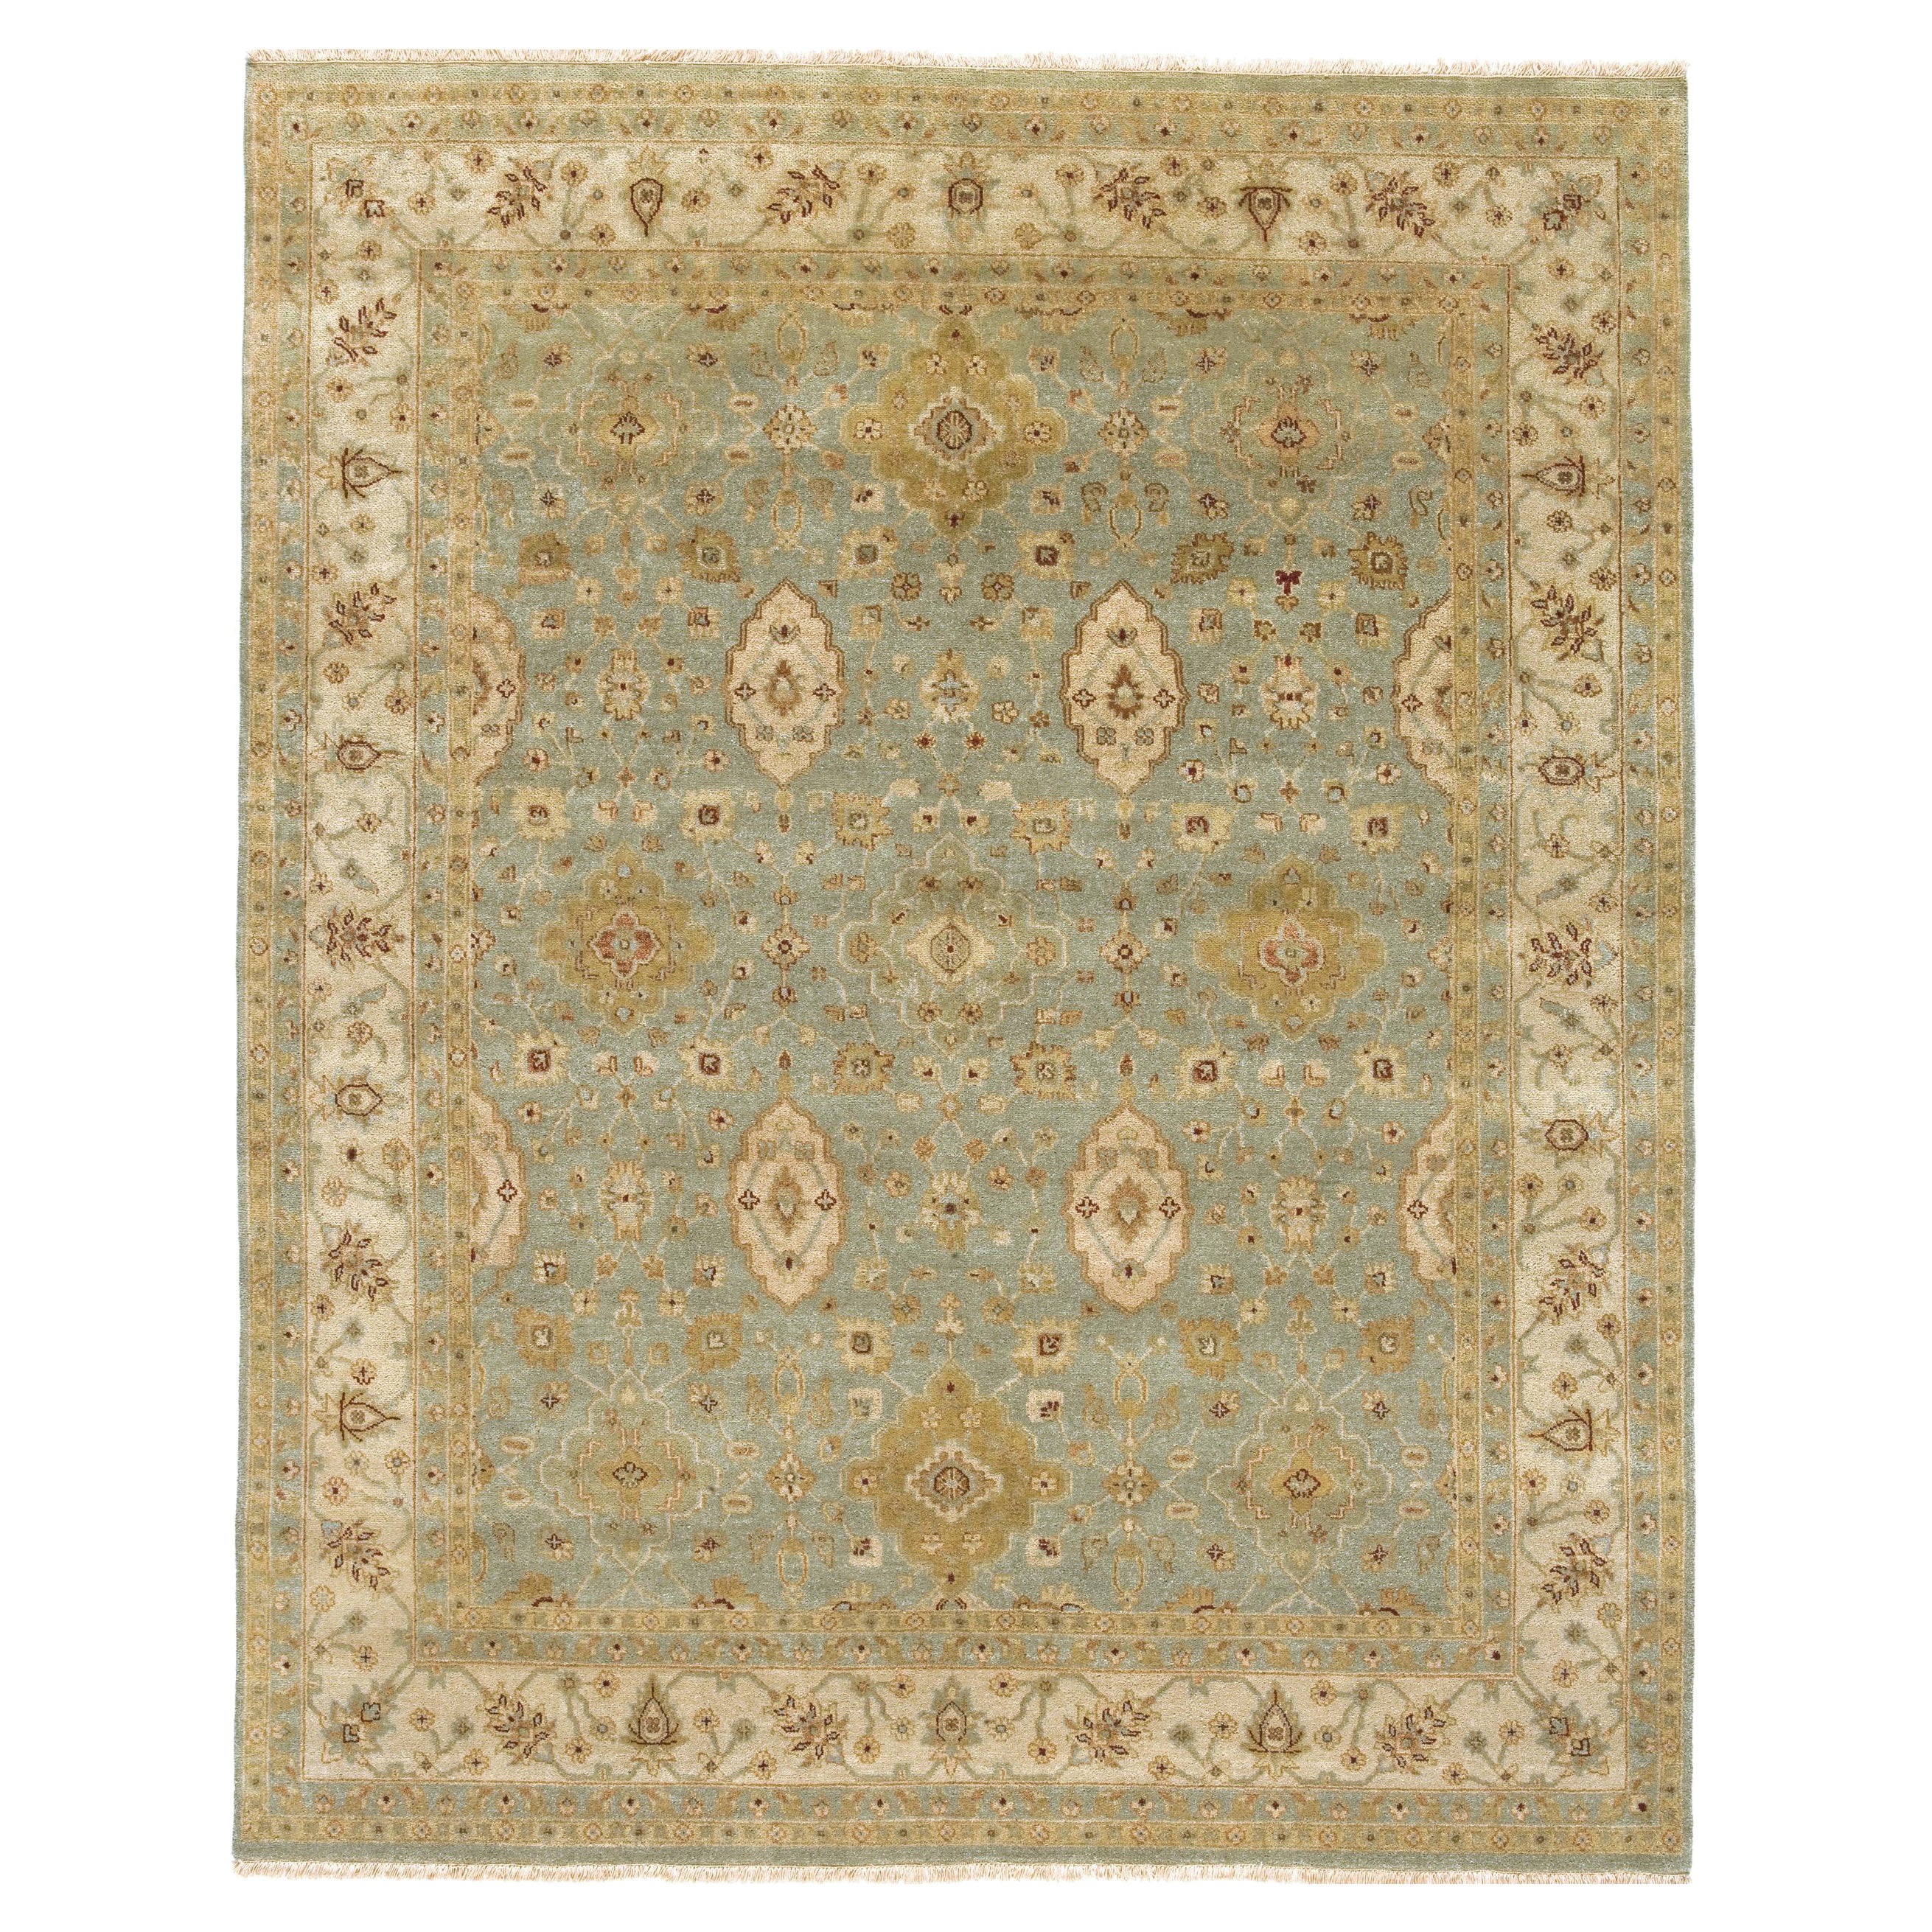 Luxury Traditional Hand-Knotted Vase Aqua & Beige 11x19 Rug